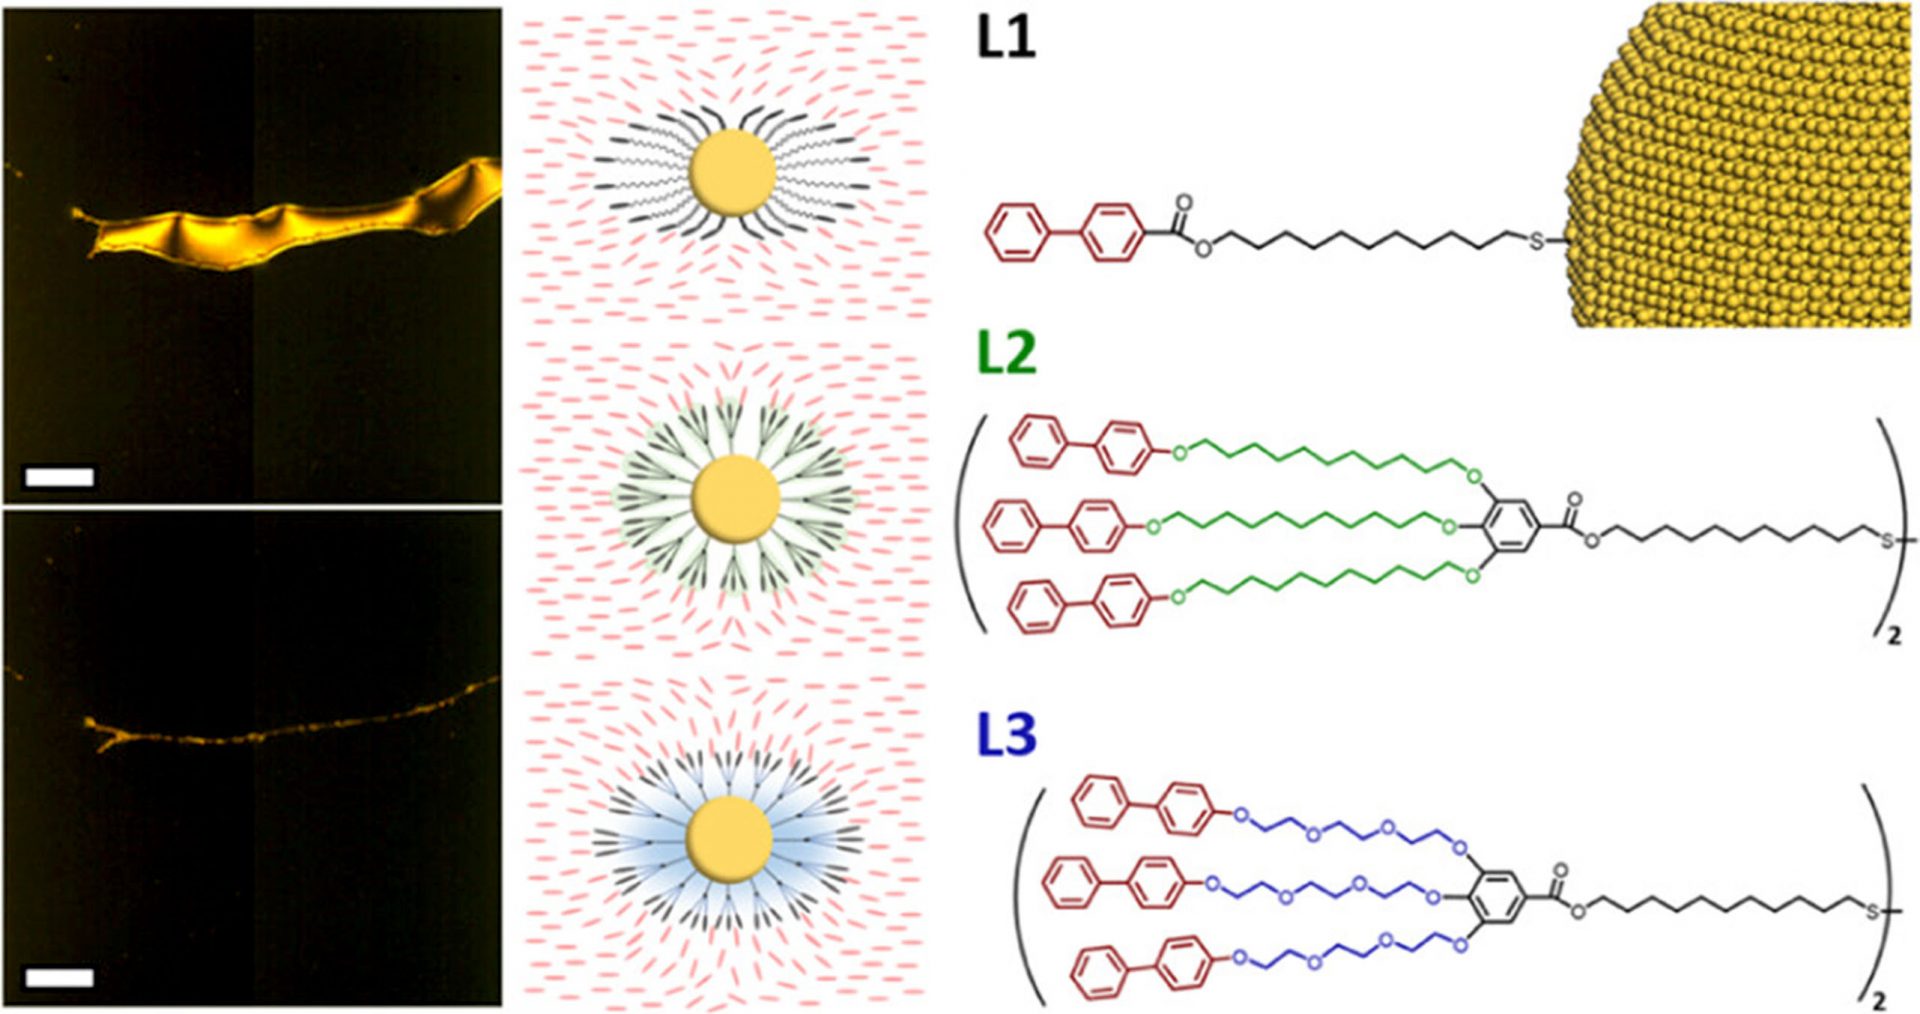 highlight image of Polarized optical microscopy images next to illustration of the proposed ligand arrangement and Dendritic Promesogenic Ligands used in the study